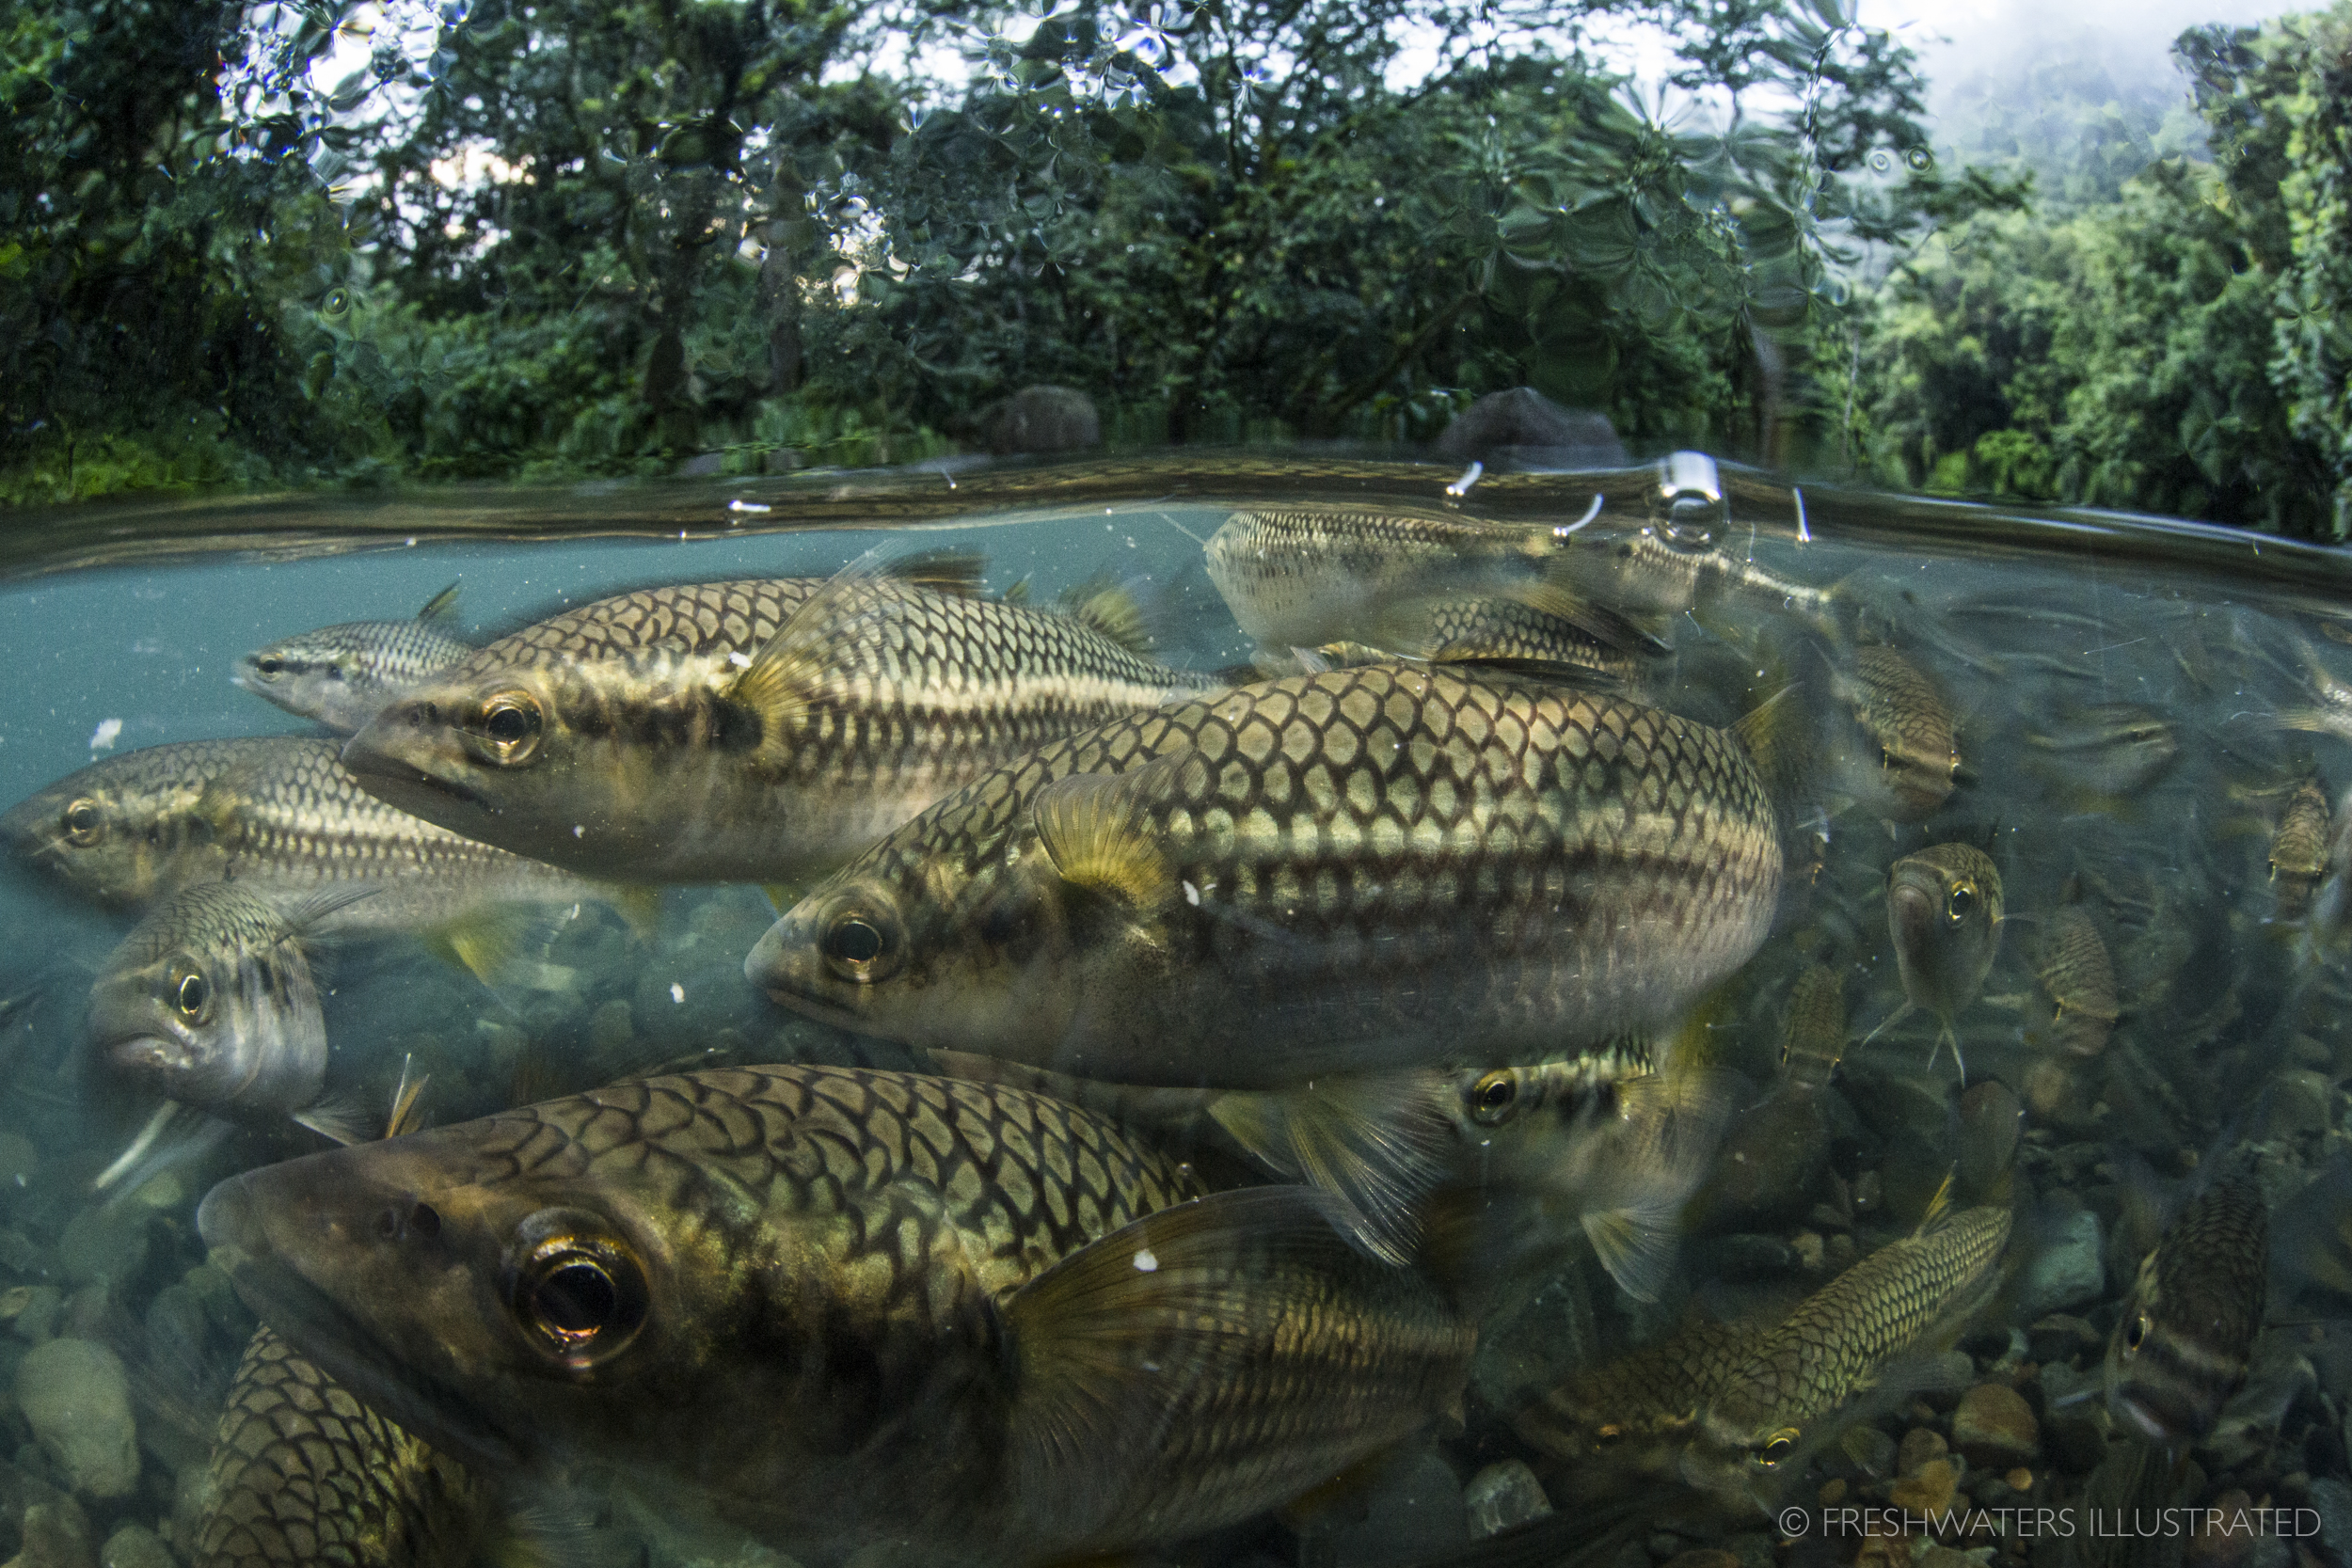  Schooling dajao (mountain mullet) in Puerto Rico’s free flowing Rio Mameyes. Designated as a wild and scenic river in the El Yunque National Forest, the Rio Mameyes supports an array of plant and animal life including five species of freshwater fish